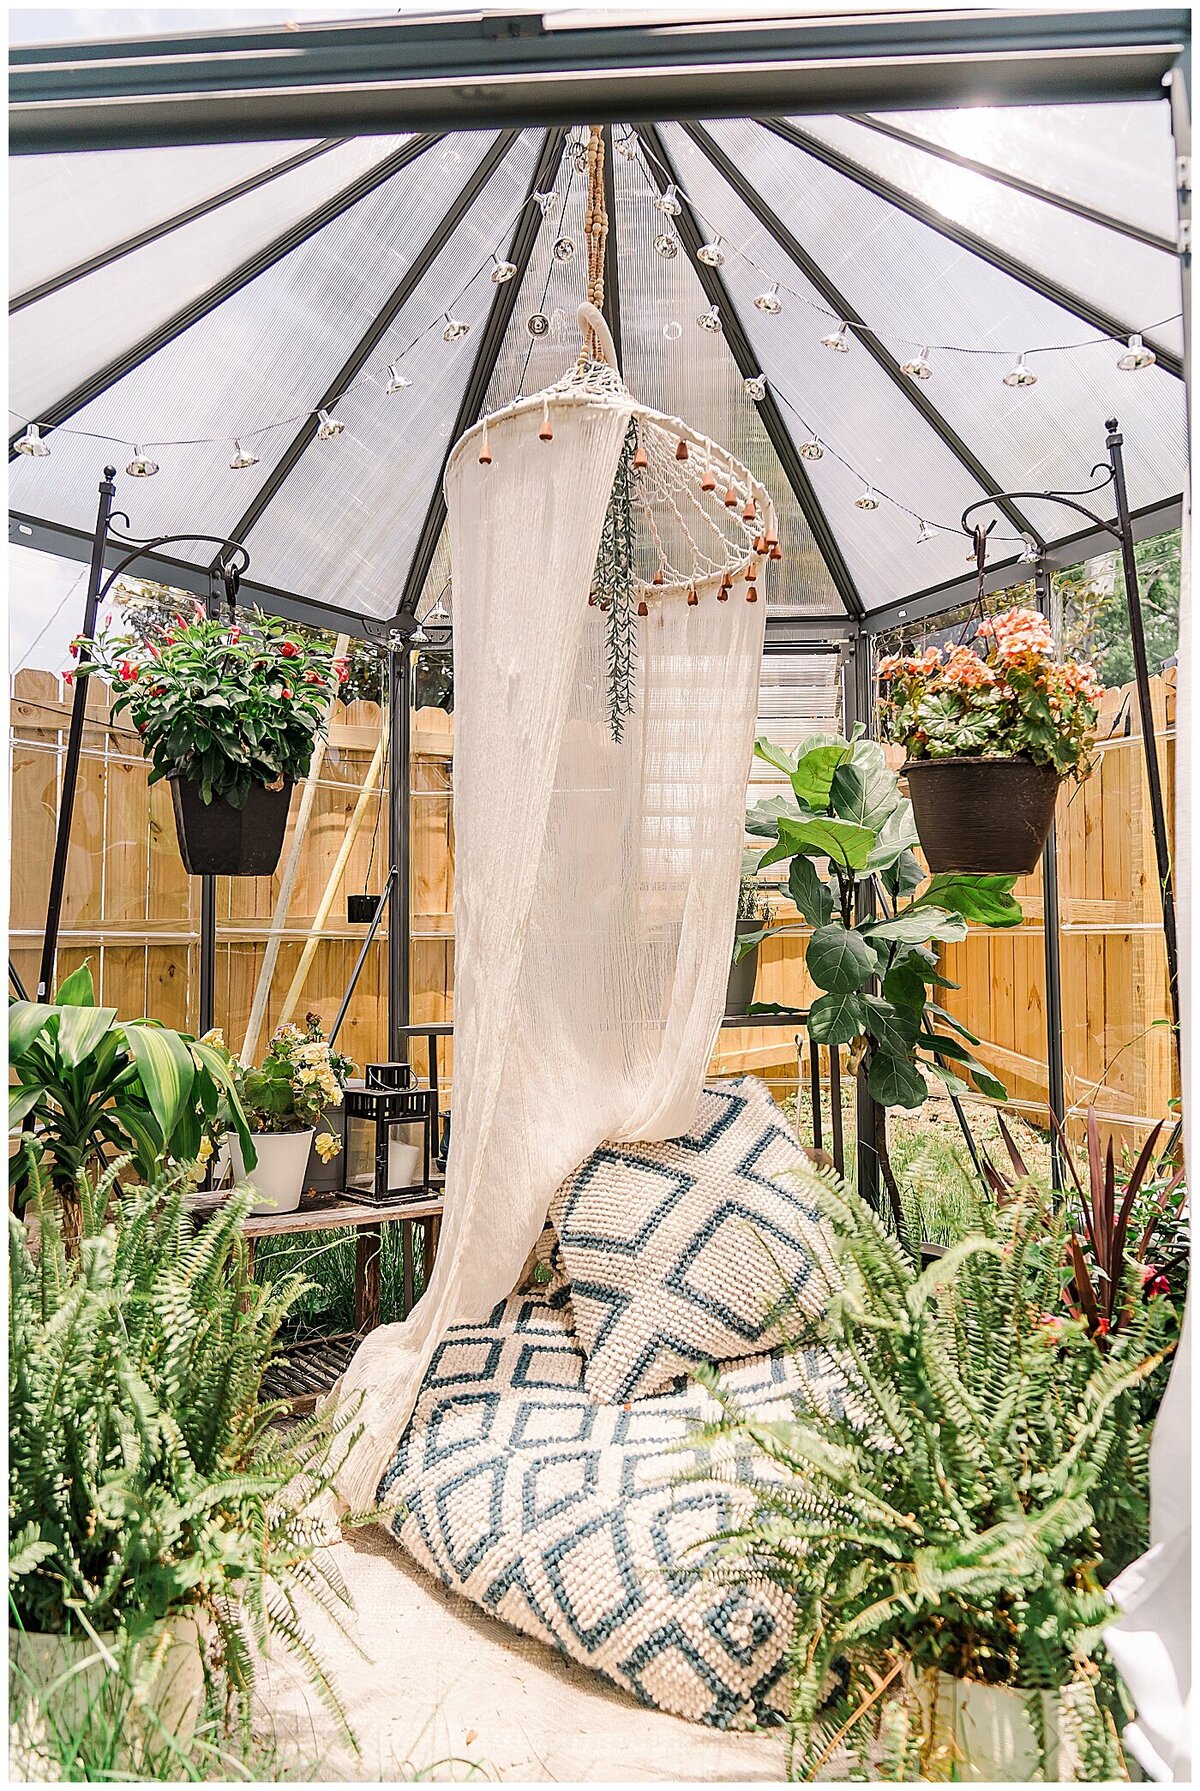 Greenhouse boudoir photography set with pillows and plants